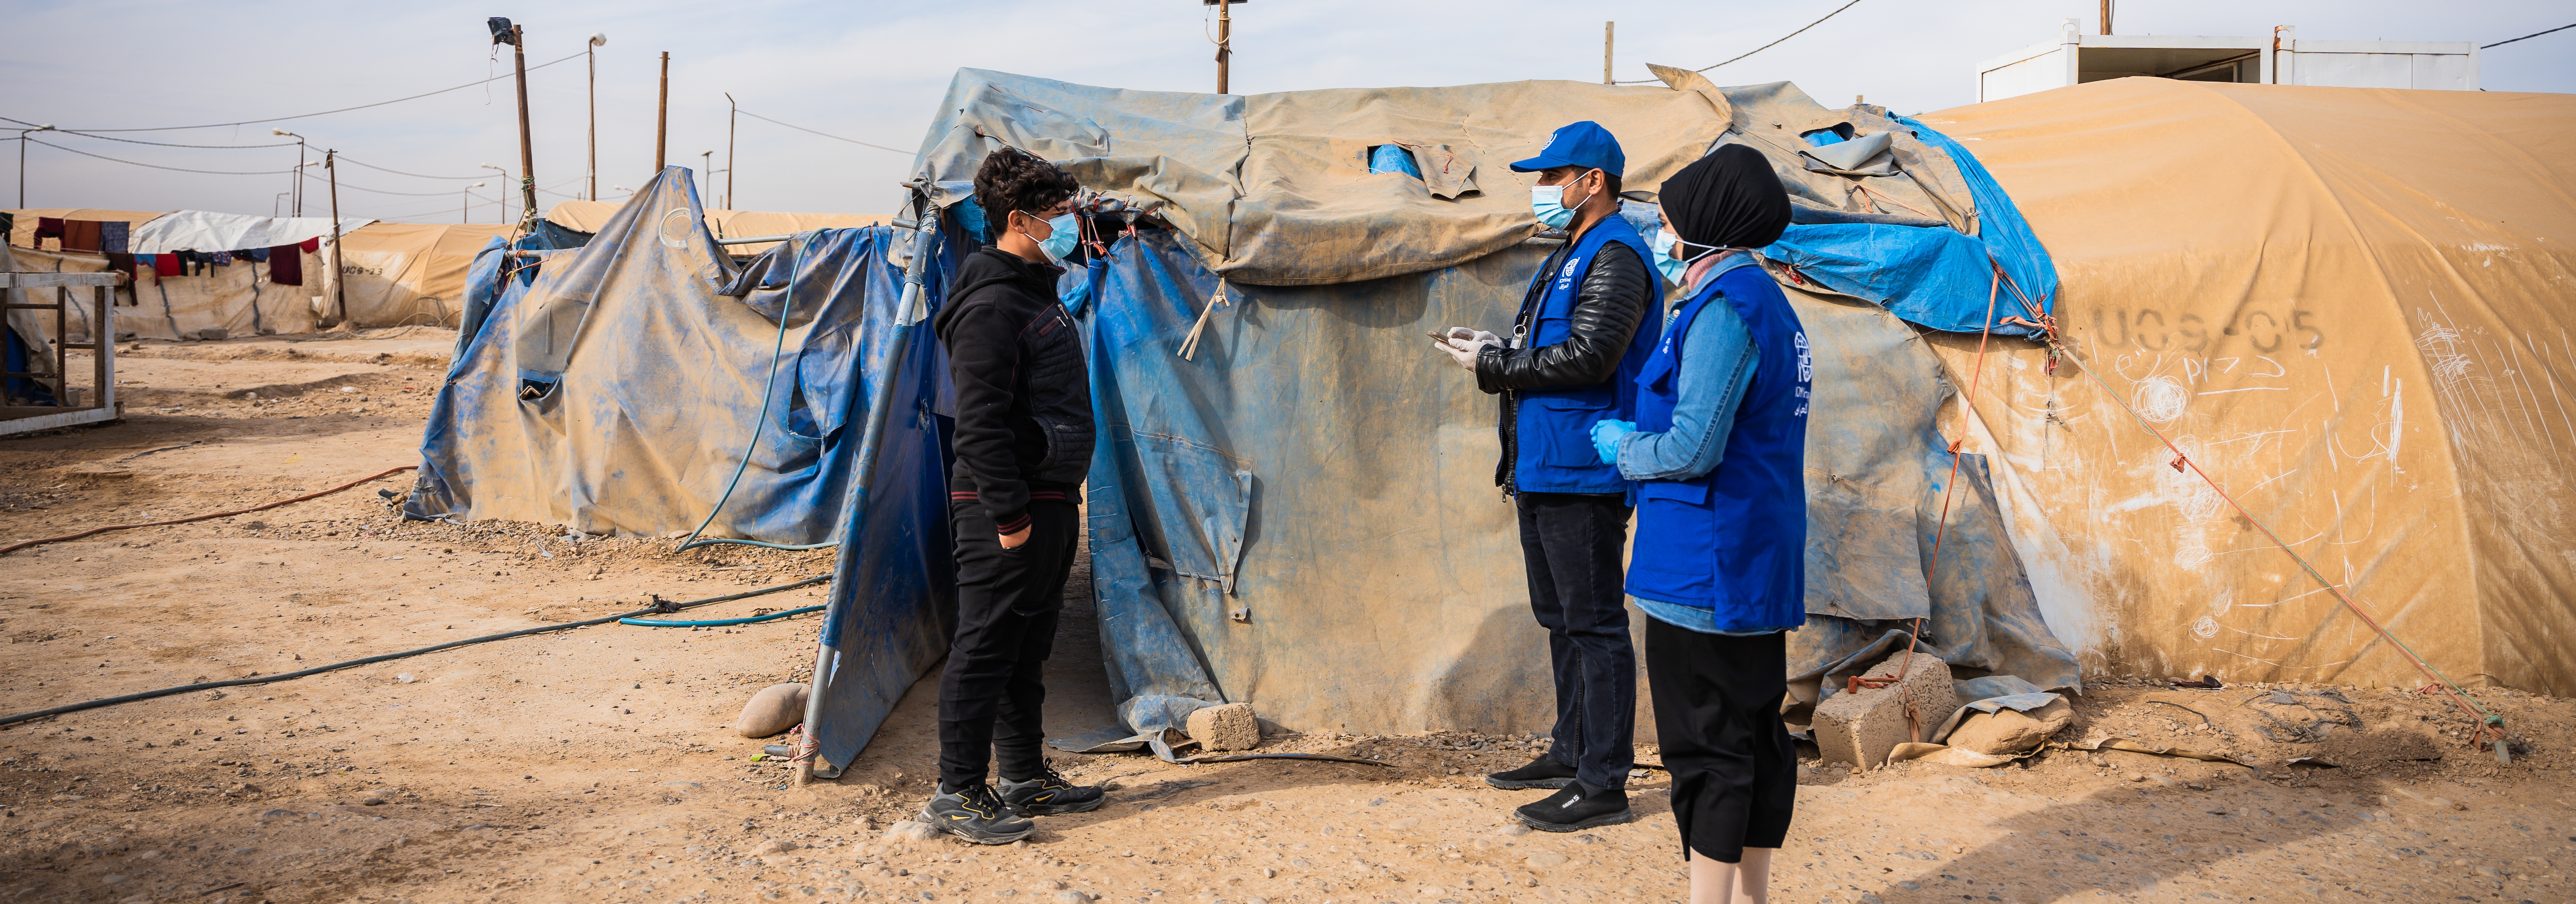 Risk Communication and Community Engagement (RCCE) in an IDP camp. Photo: © IOM Iraq 2021/ Yad Abdulqader